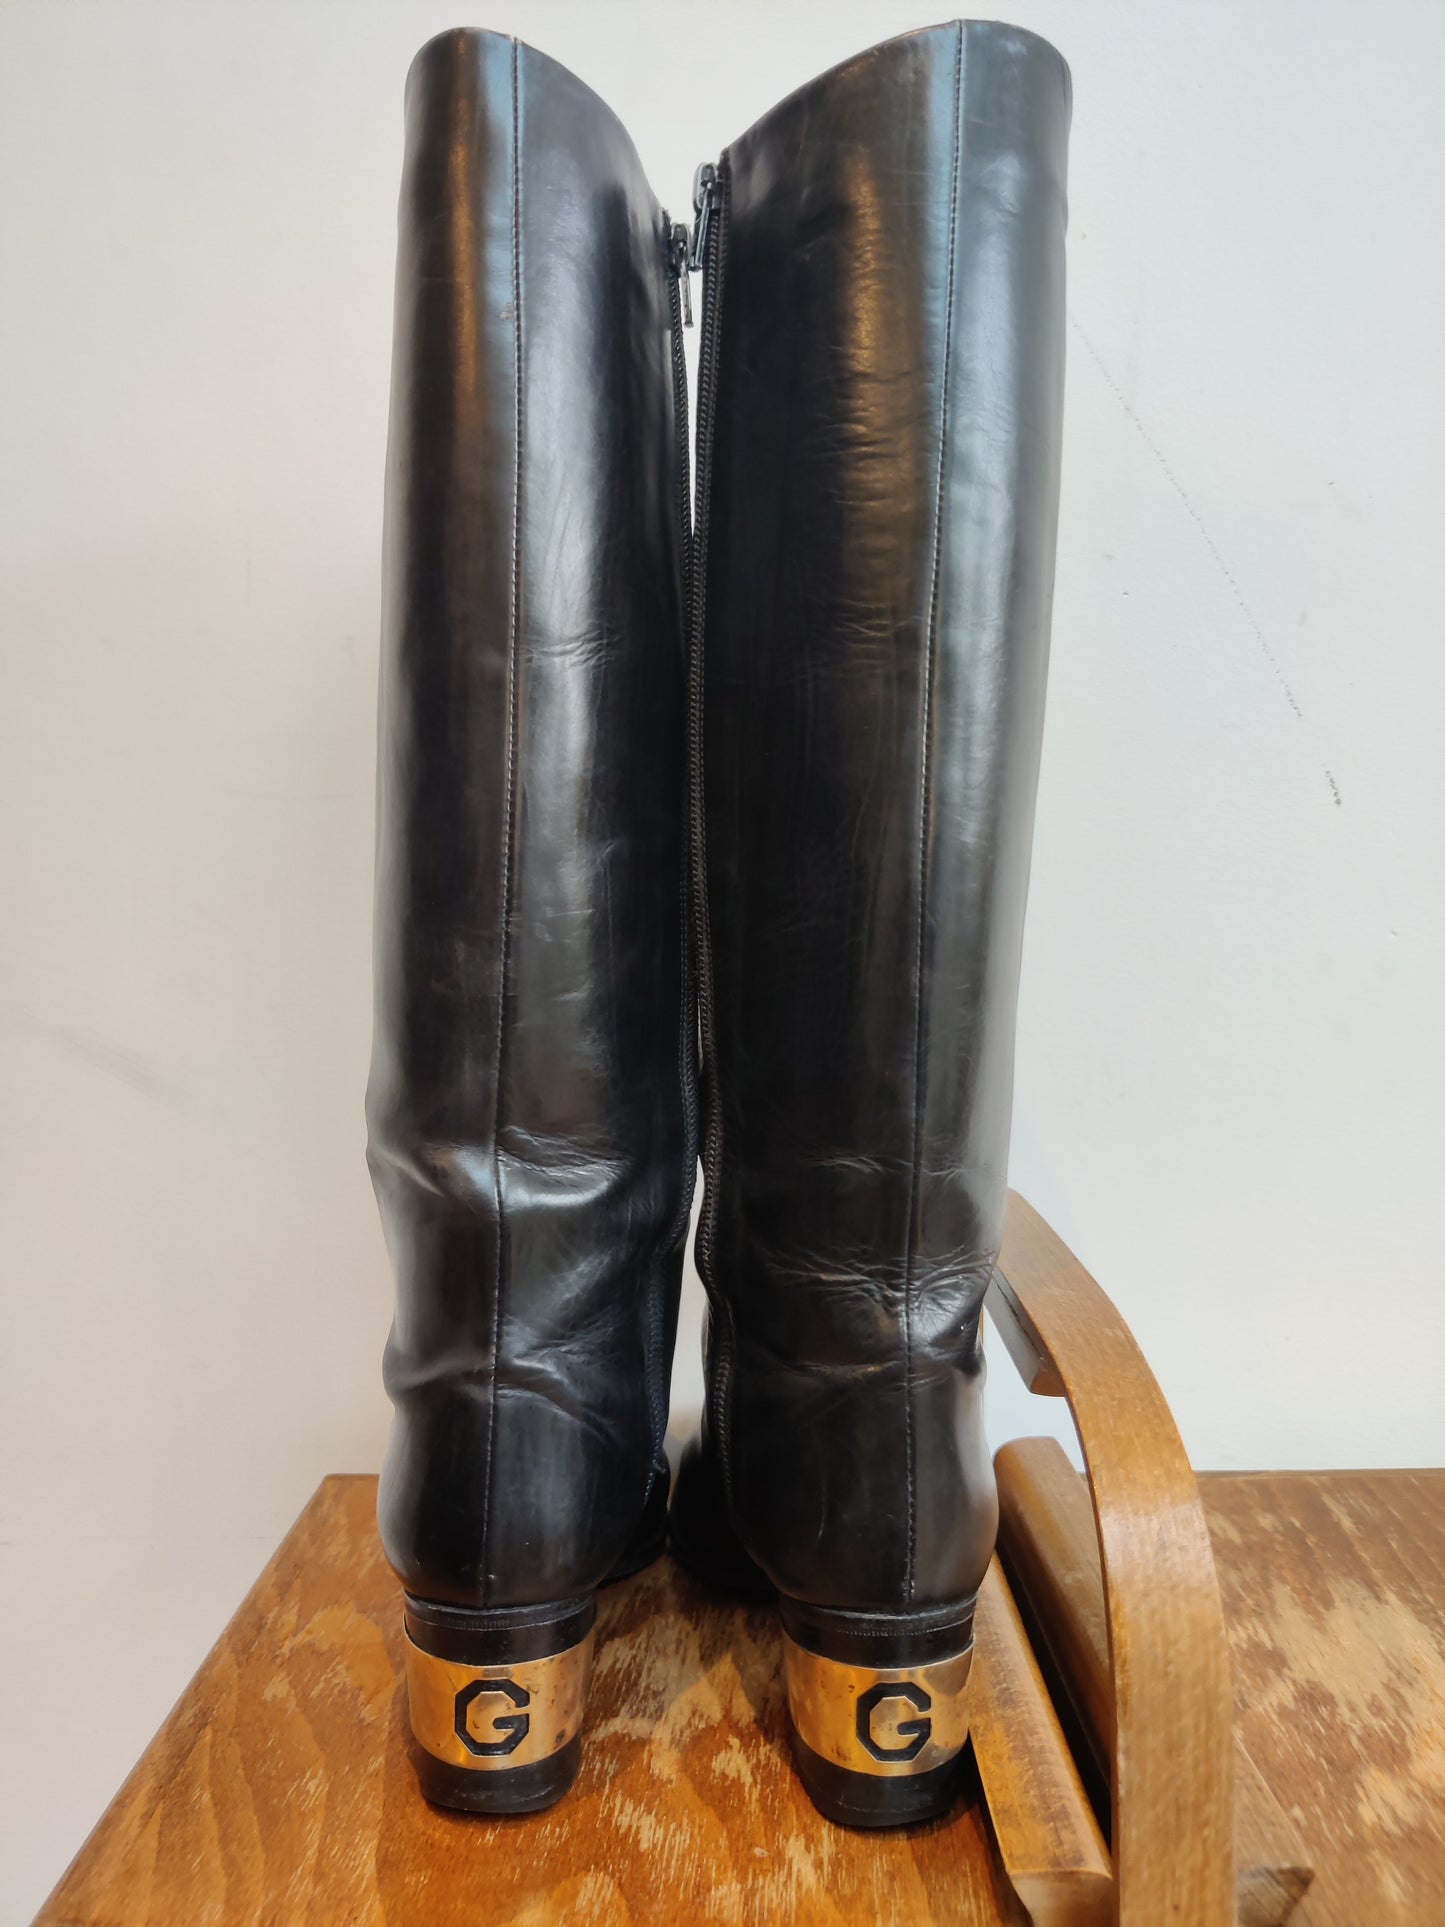 Vintage Givenchy knee high boots in black and gold size 4